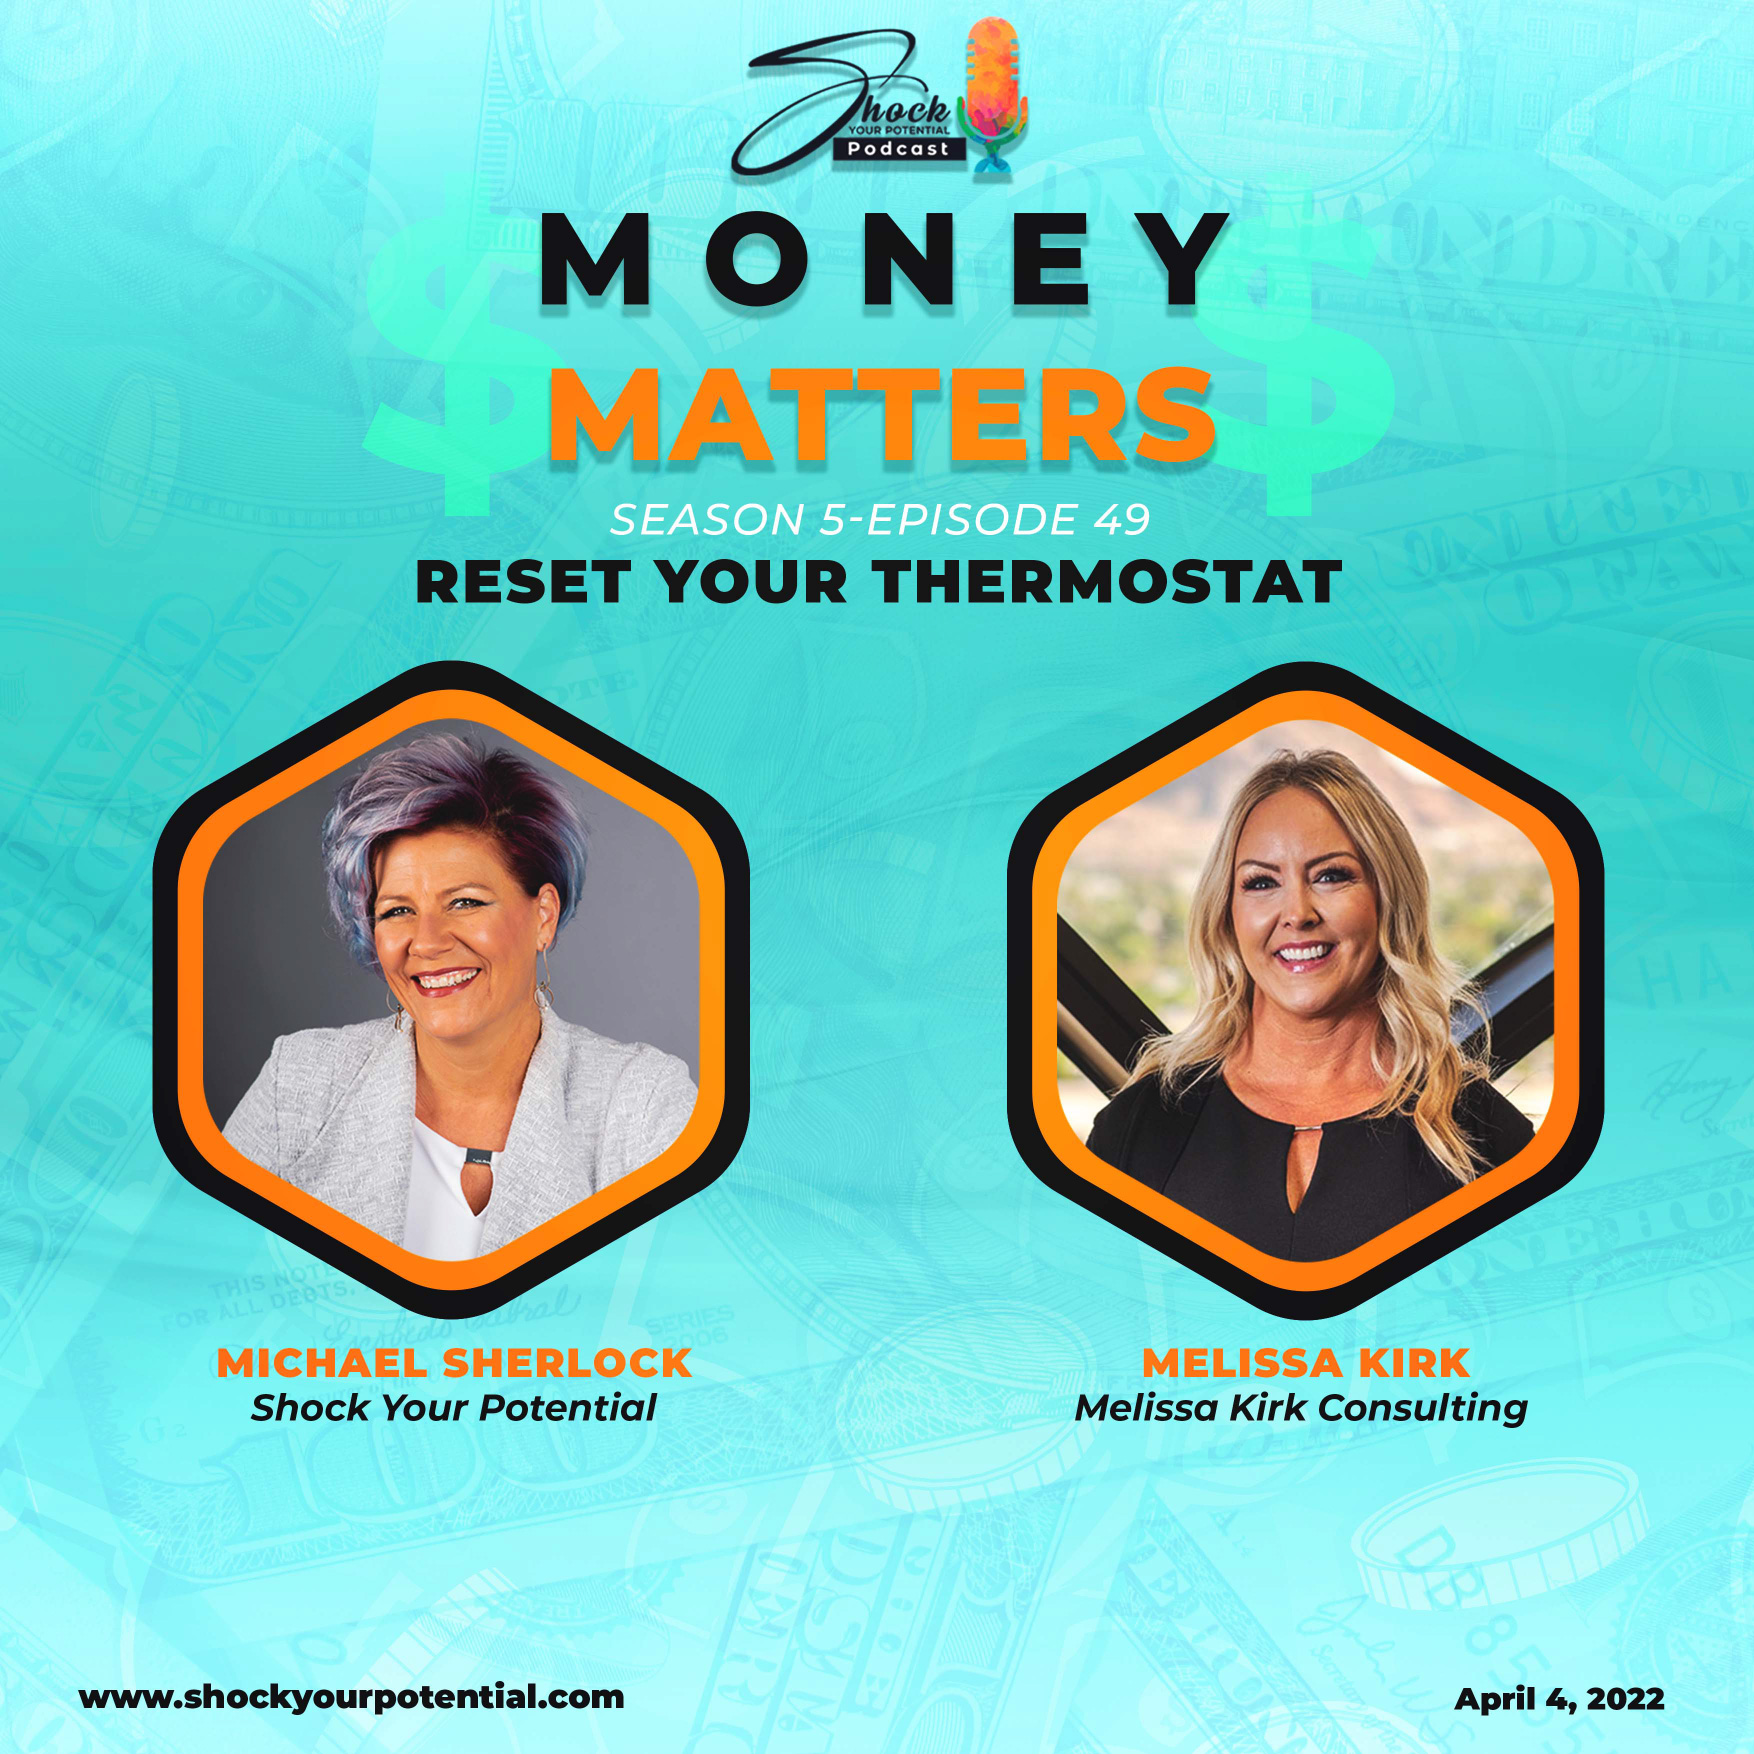 Reset Your Thermostat – Melissa Kirk